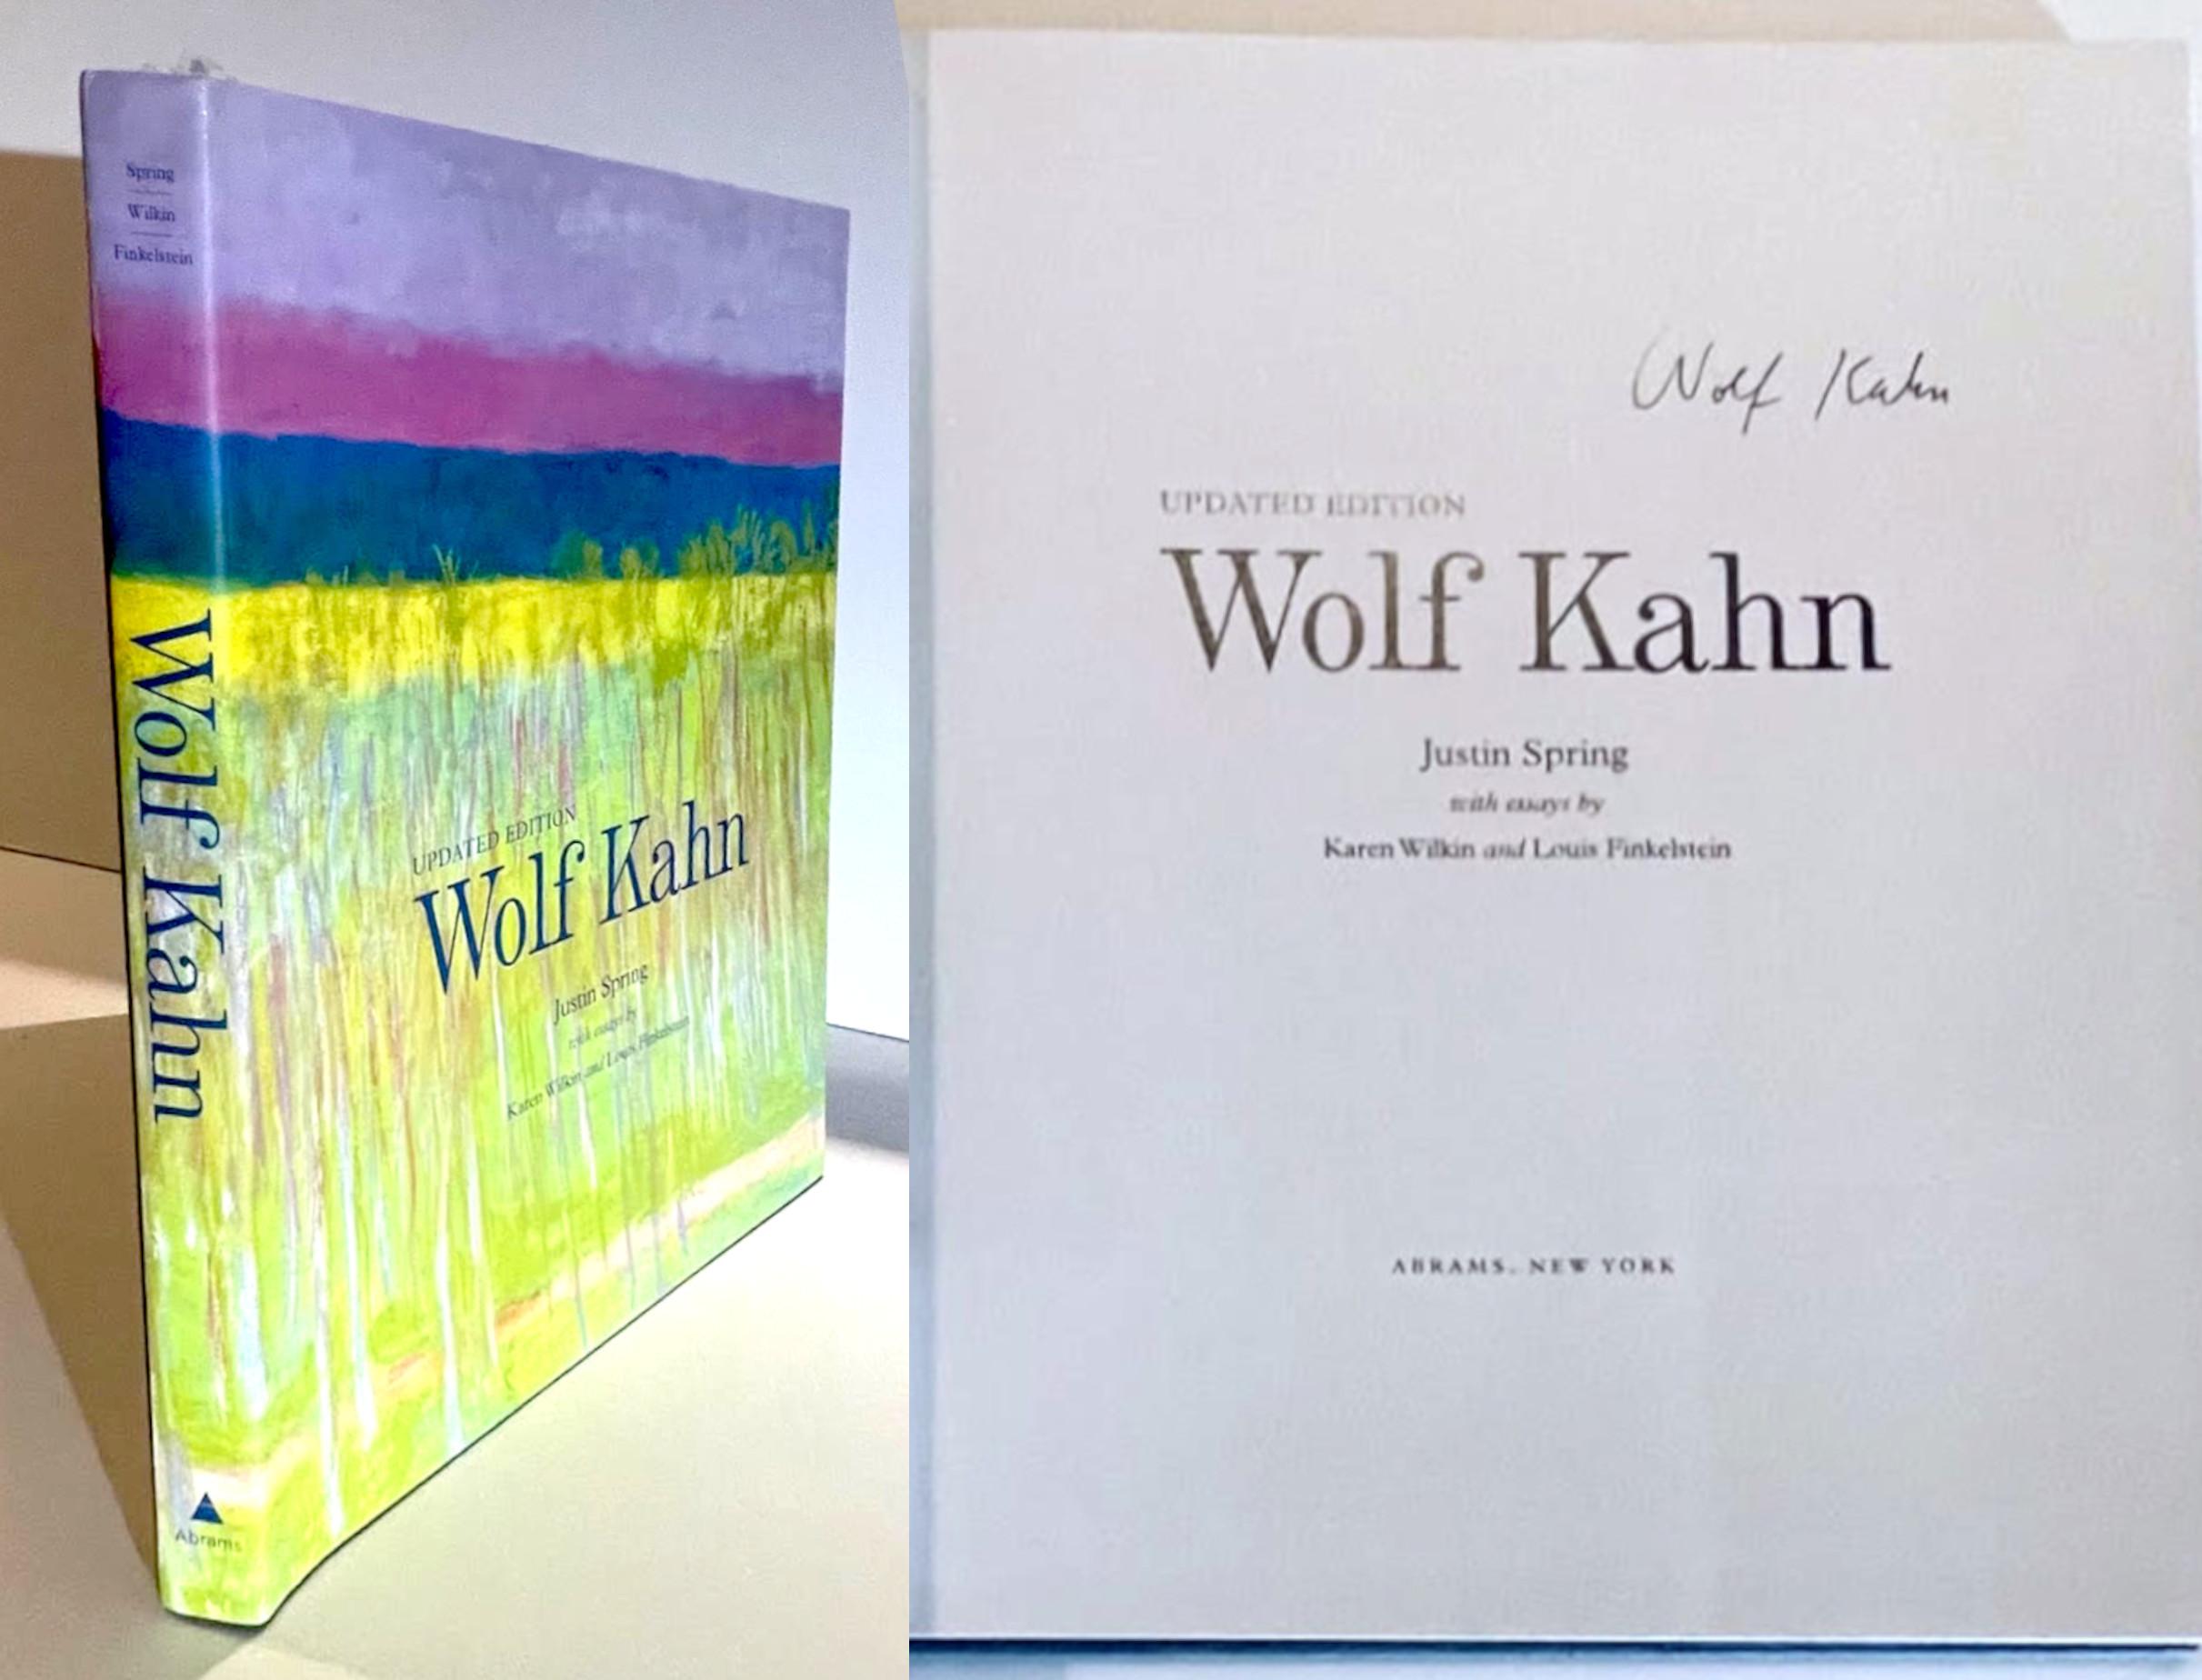 Hardback monograph with dust jacket: Wolf Kahn (hand signed by Wolf Kahn)